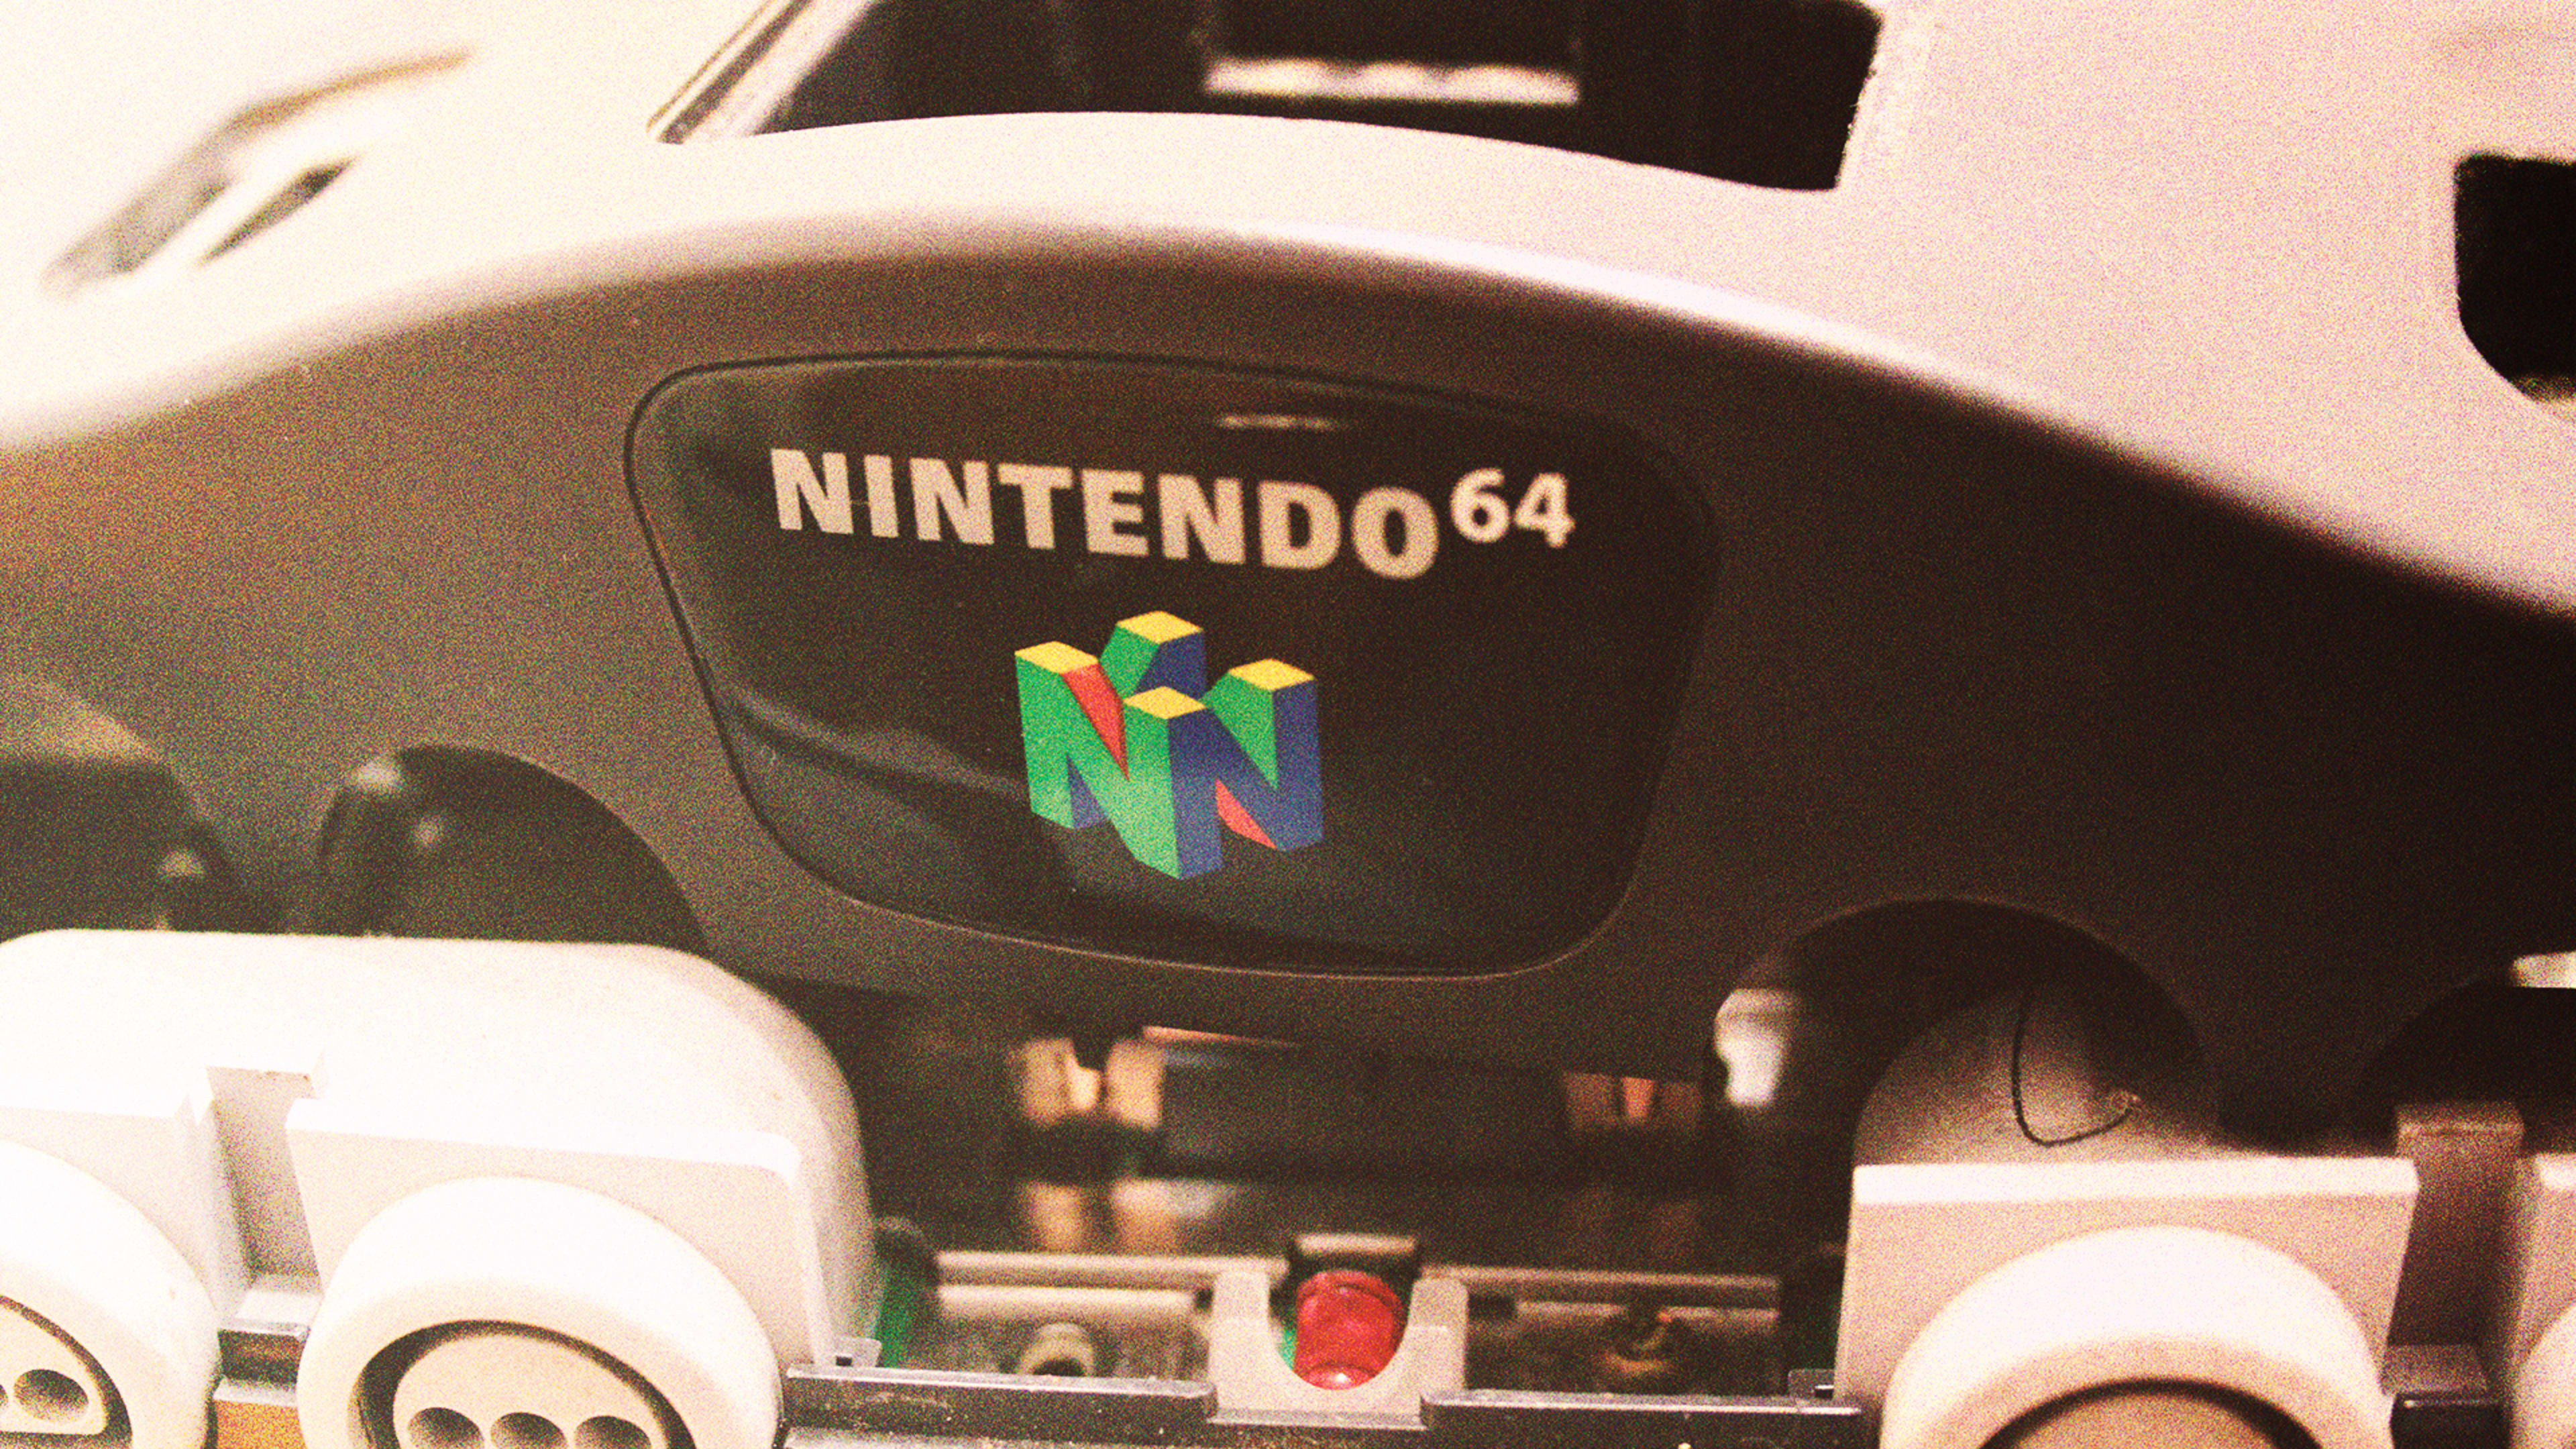 Sorry, but the Nintendo 64 Classic isn’t happening anytime soon